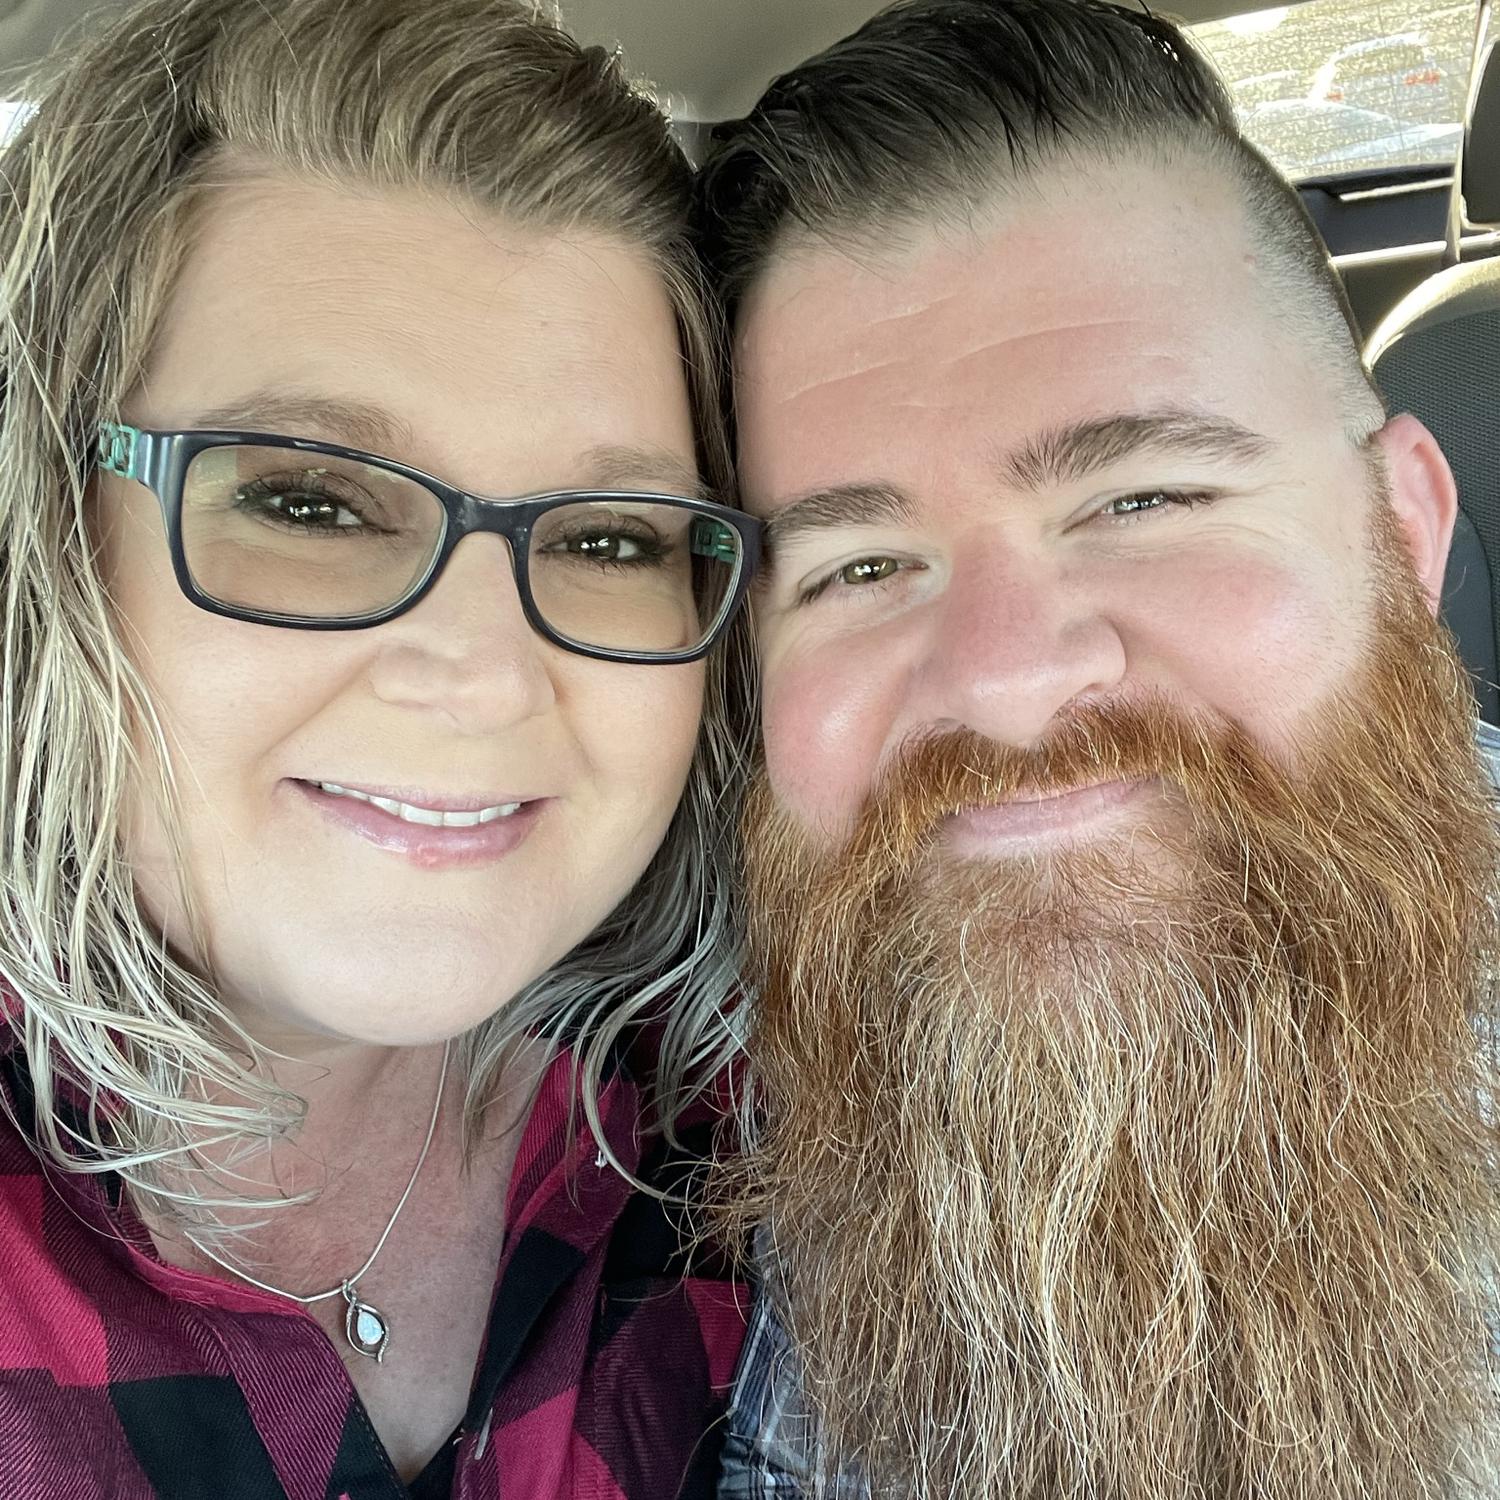 Date night to Texas Roadhouse. We waited 2.5 hours for dinner that night. We didnt have a time line and our kids were just fine. We were hungry but it was a good wait.